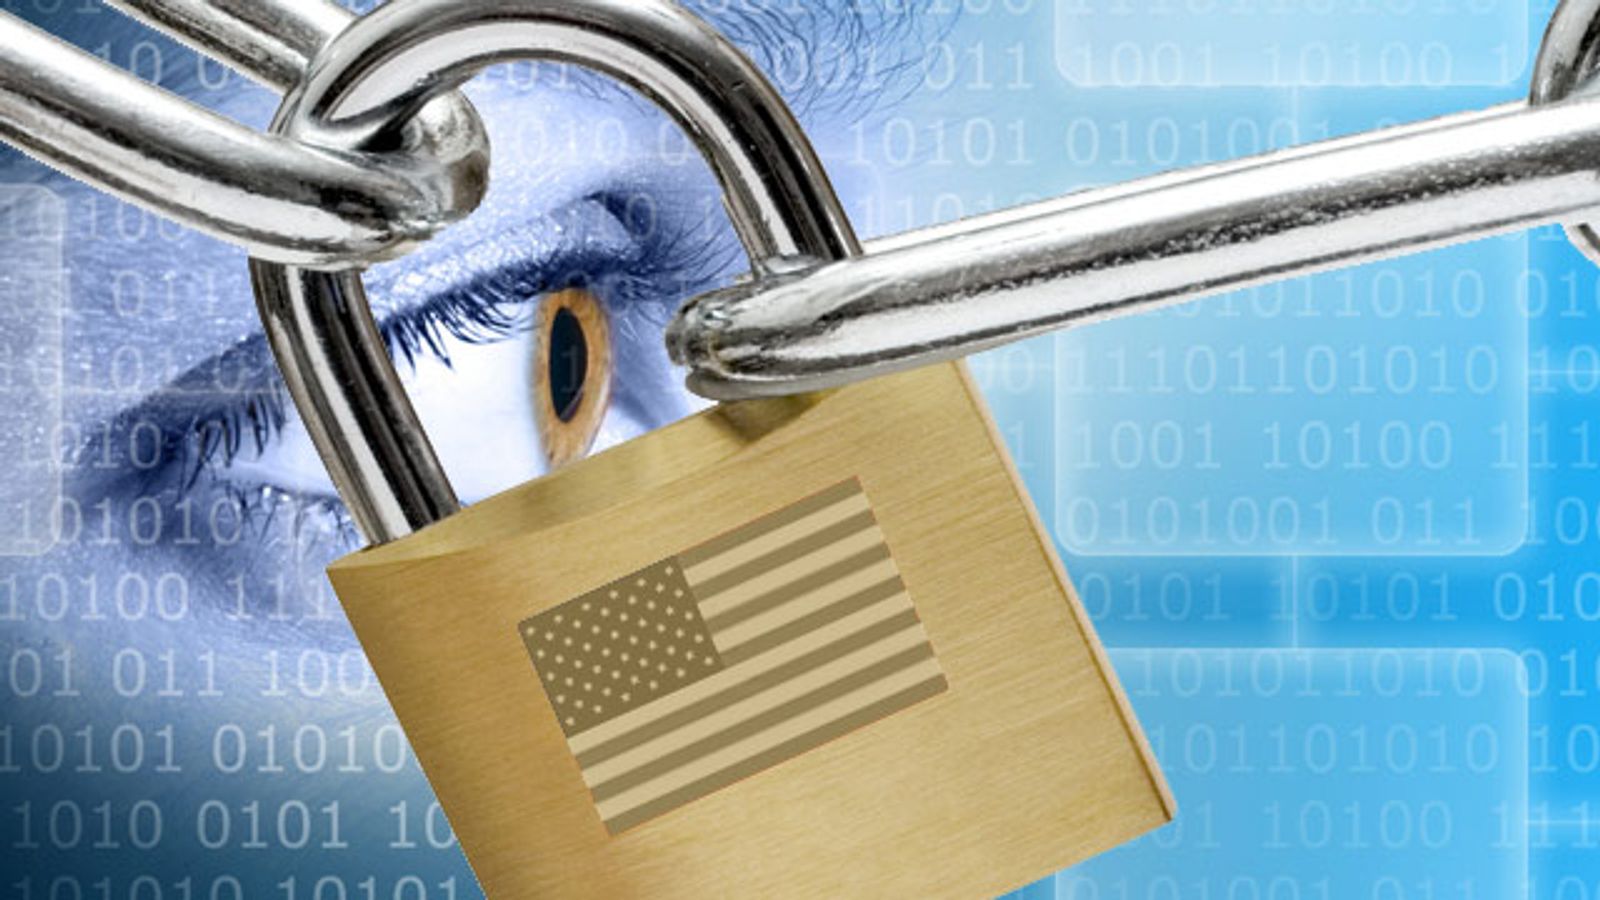 Senate Proposes Federal Cybersecurity Bill and 'Czar'